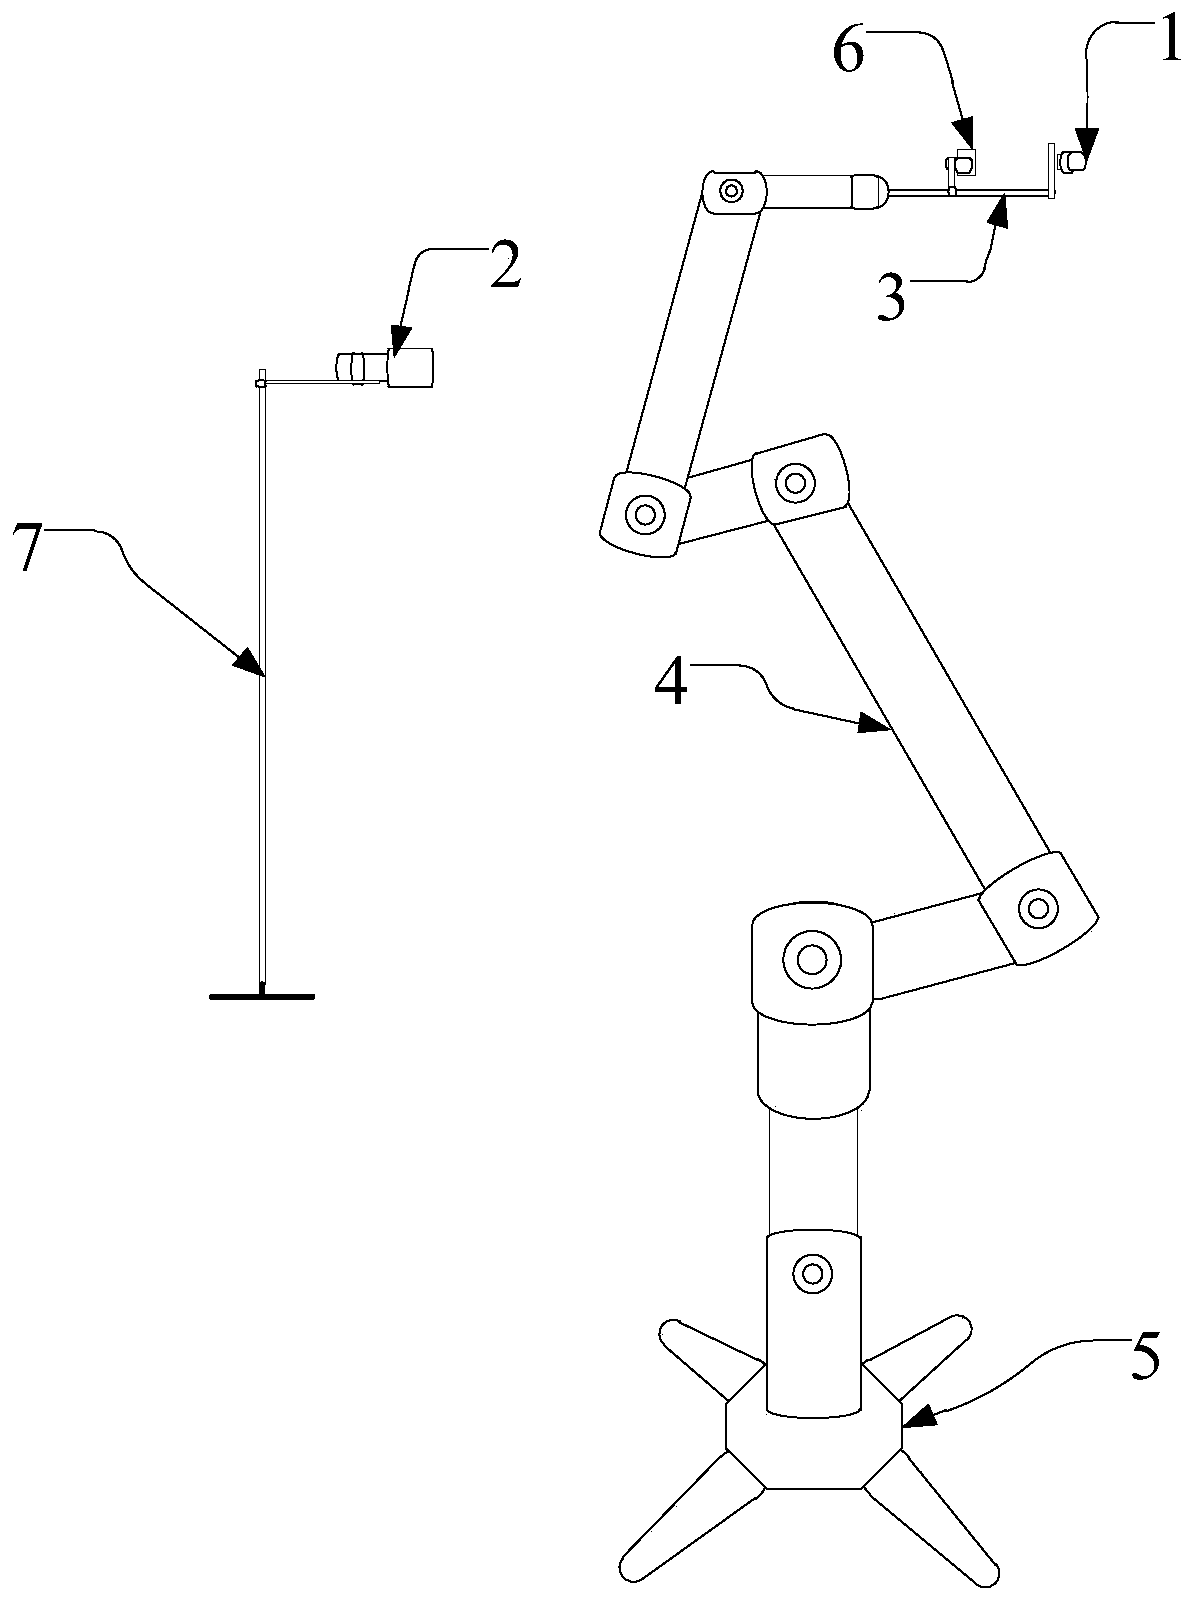 Automatic body temperature measuring device and method based on collaborative robot